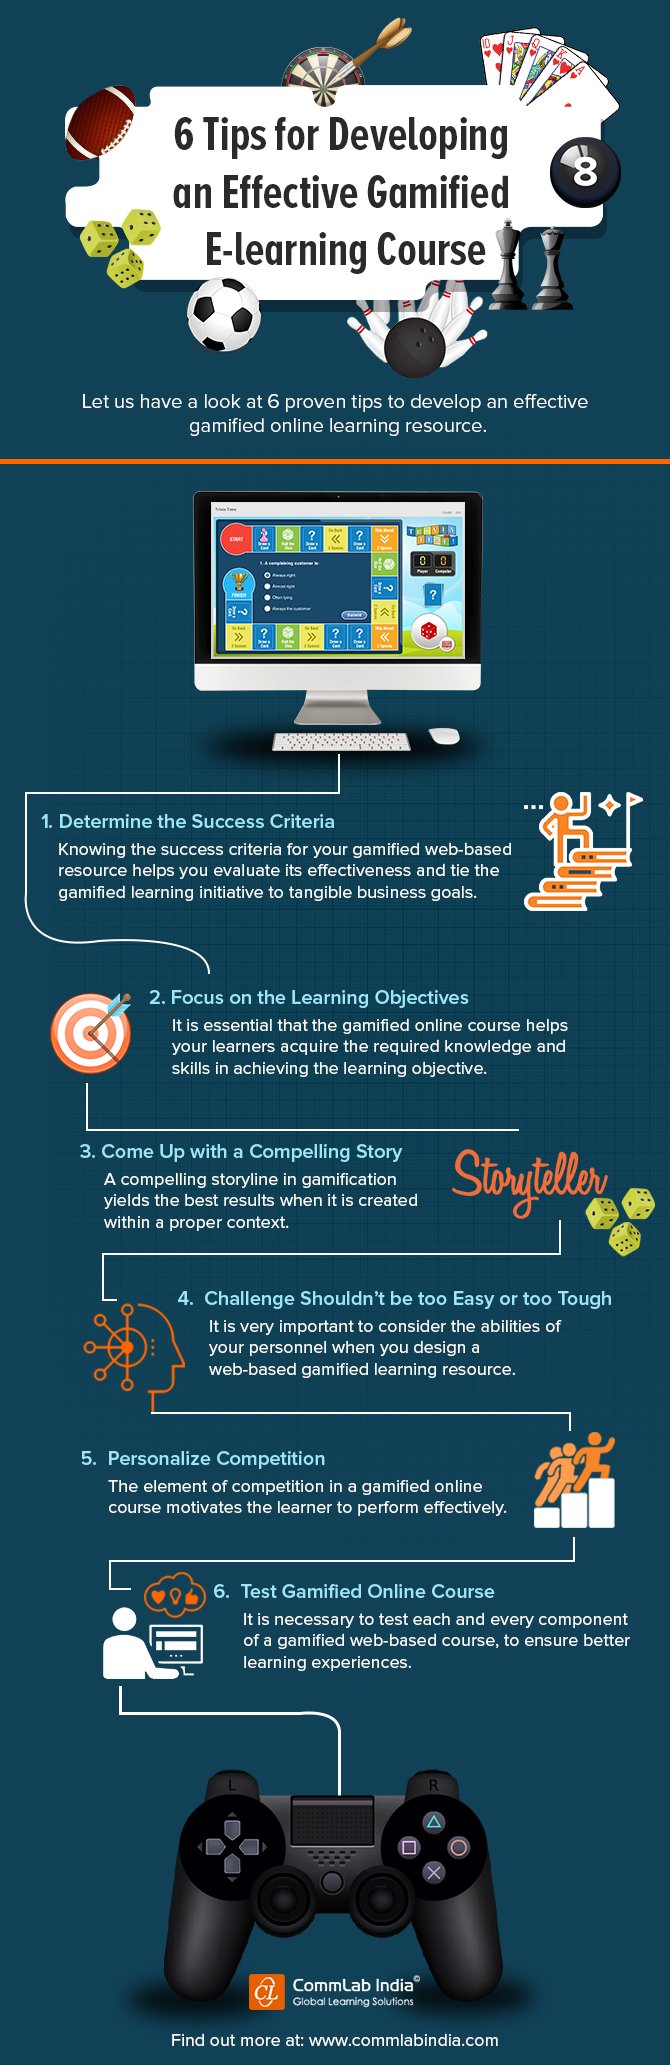 6 Tips for Developing an Effective Gamified E-learning Course [Infographic]